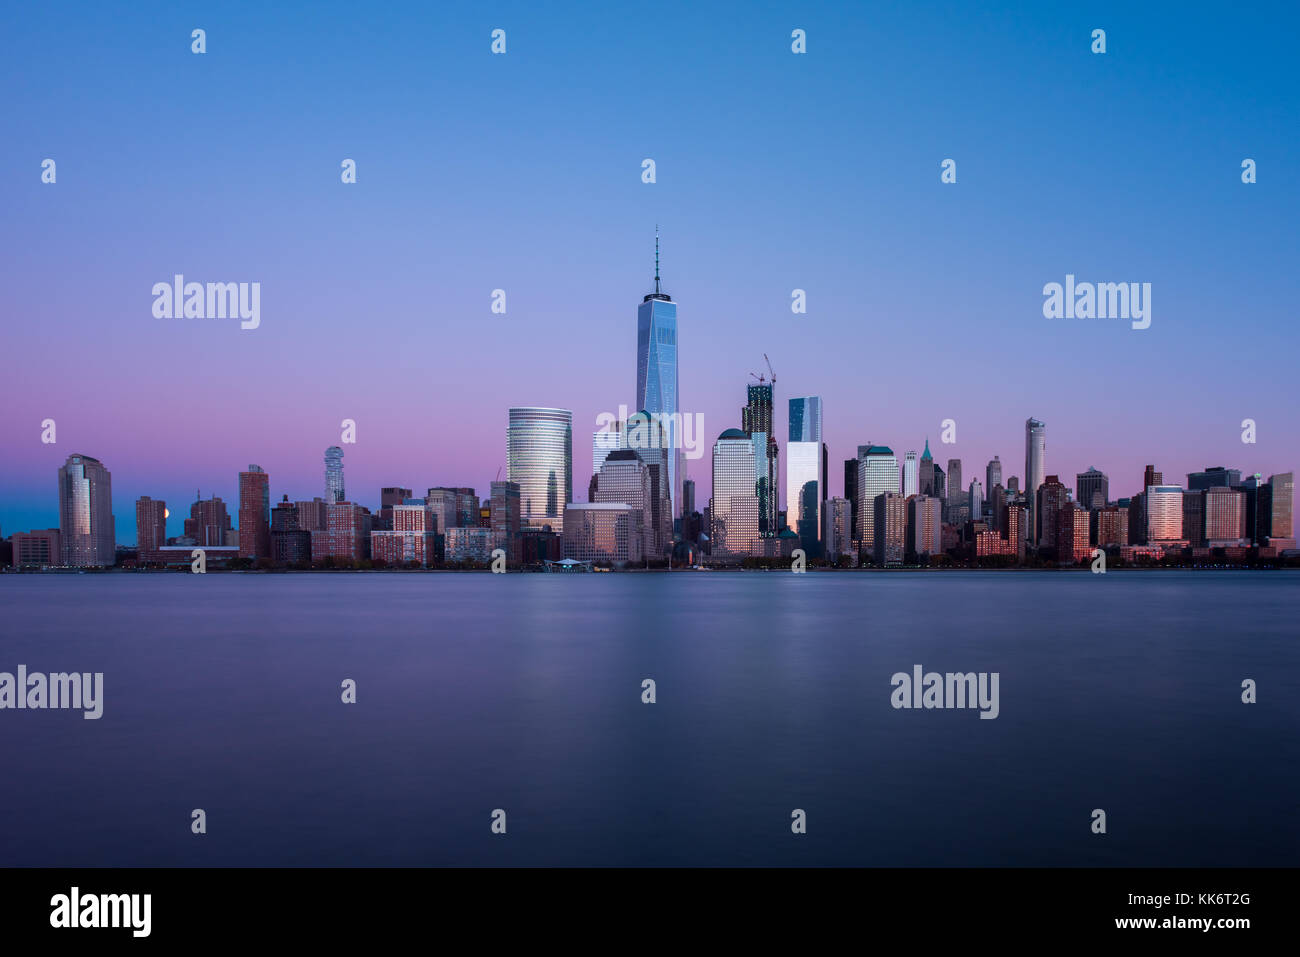 New York skyline as viewed across the Hudson River in New Jersey at sunset. Stock Photo